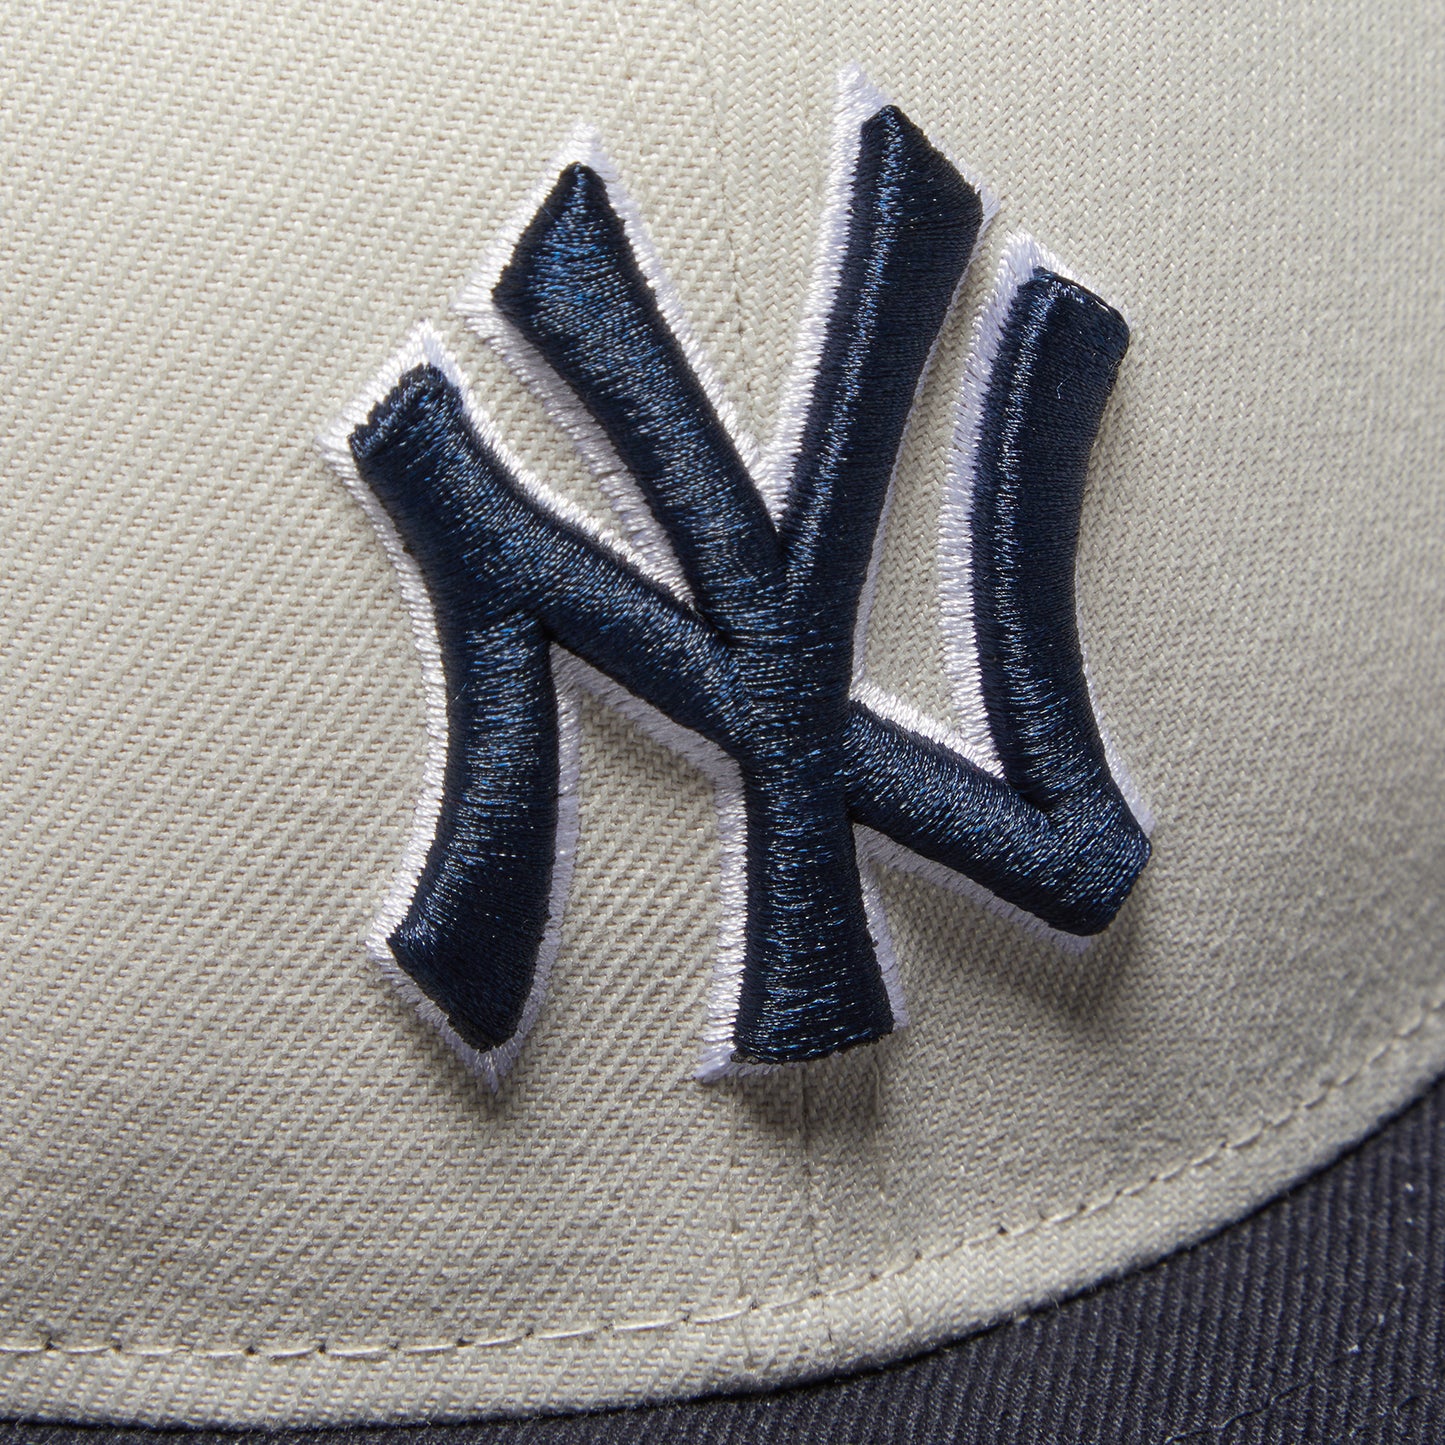 New Era New York Yankees 59Fitted Fitted Hat (White/Navy)